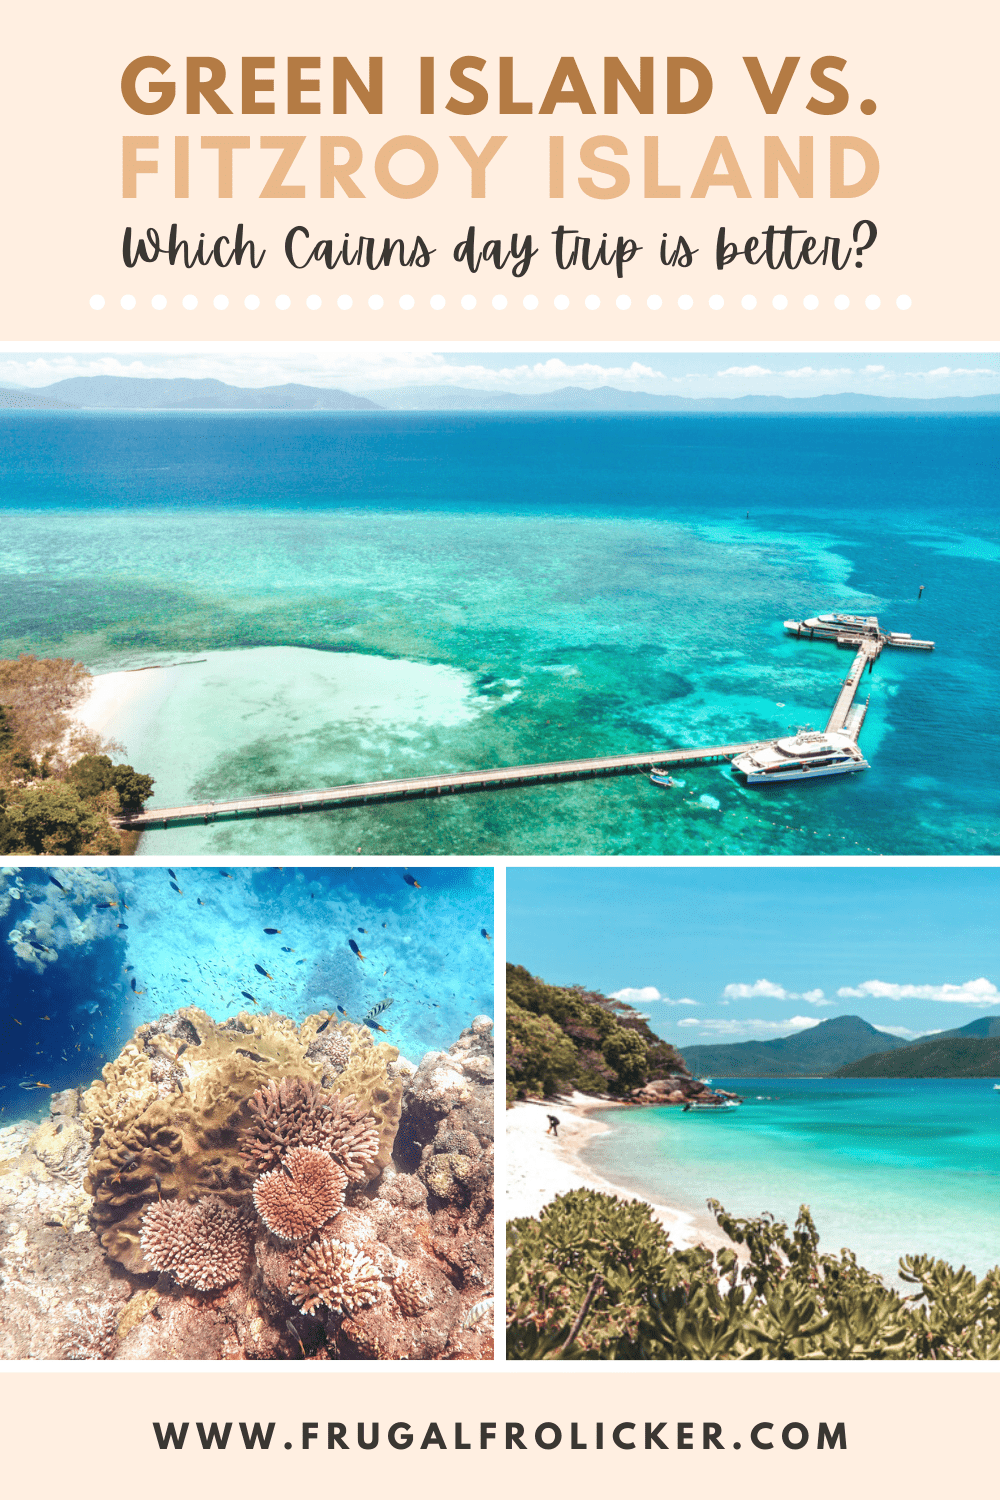 Fitzroy-Island or Green Island: which is the better day trip from Cairns?